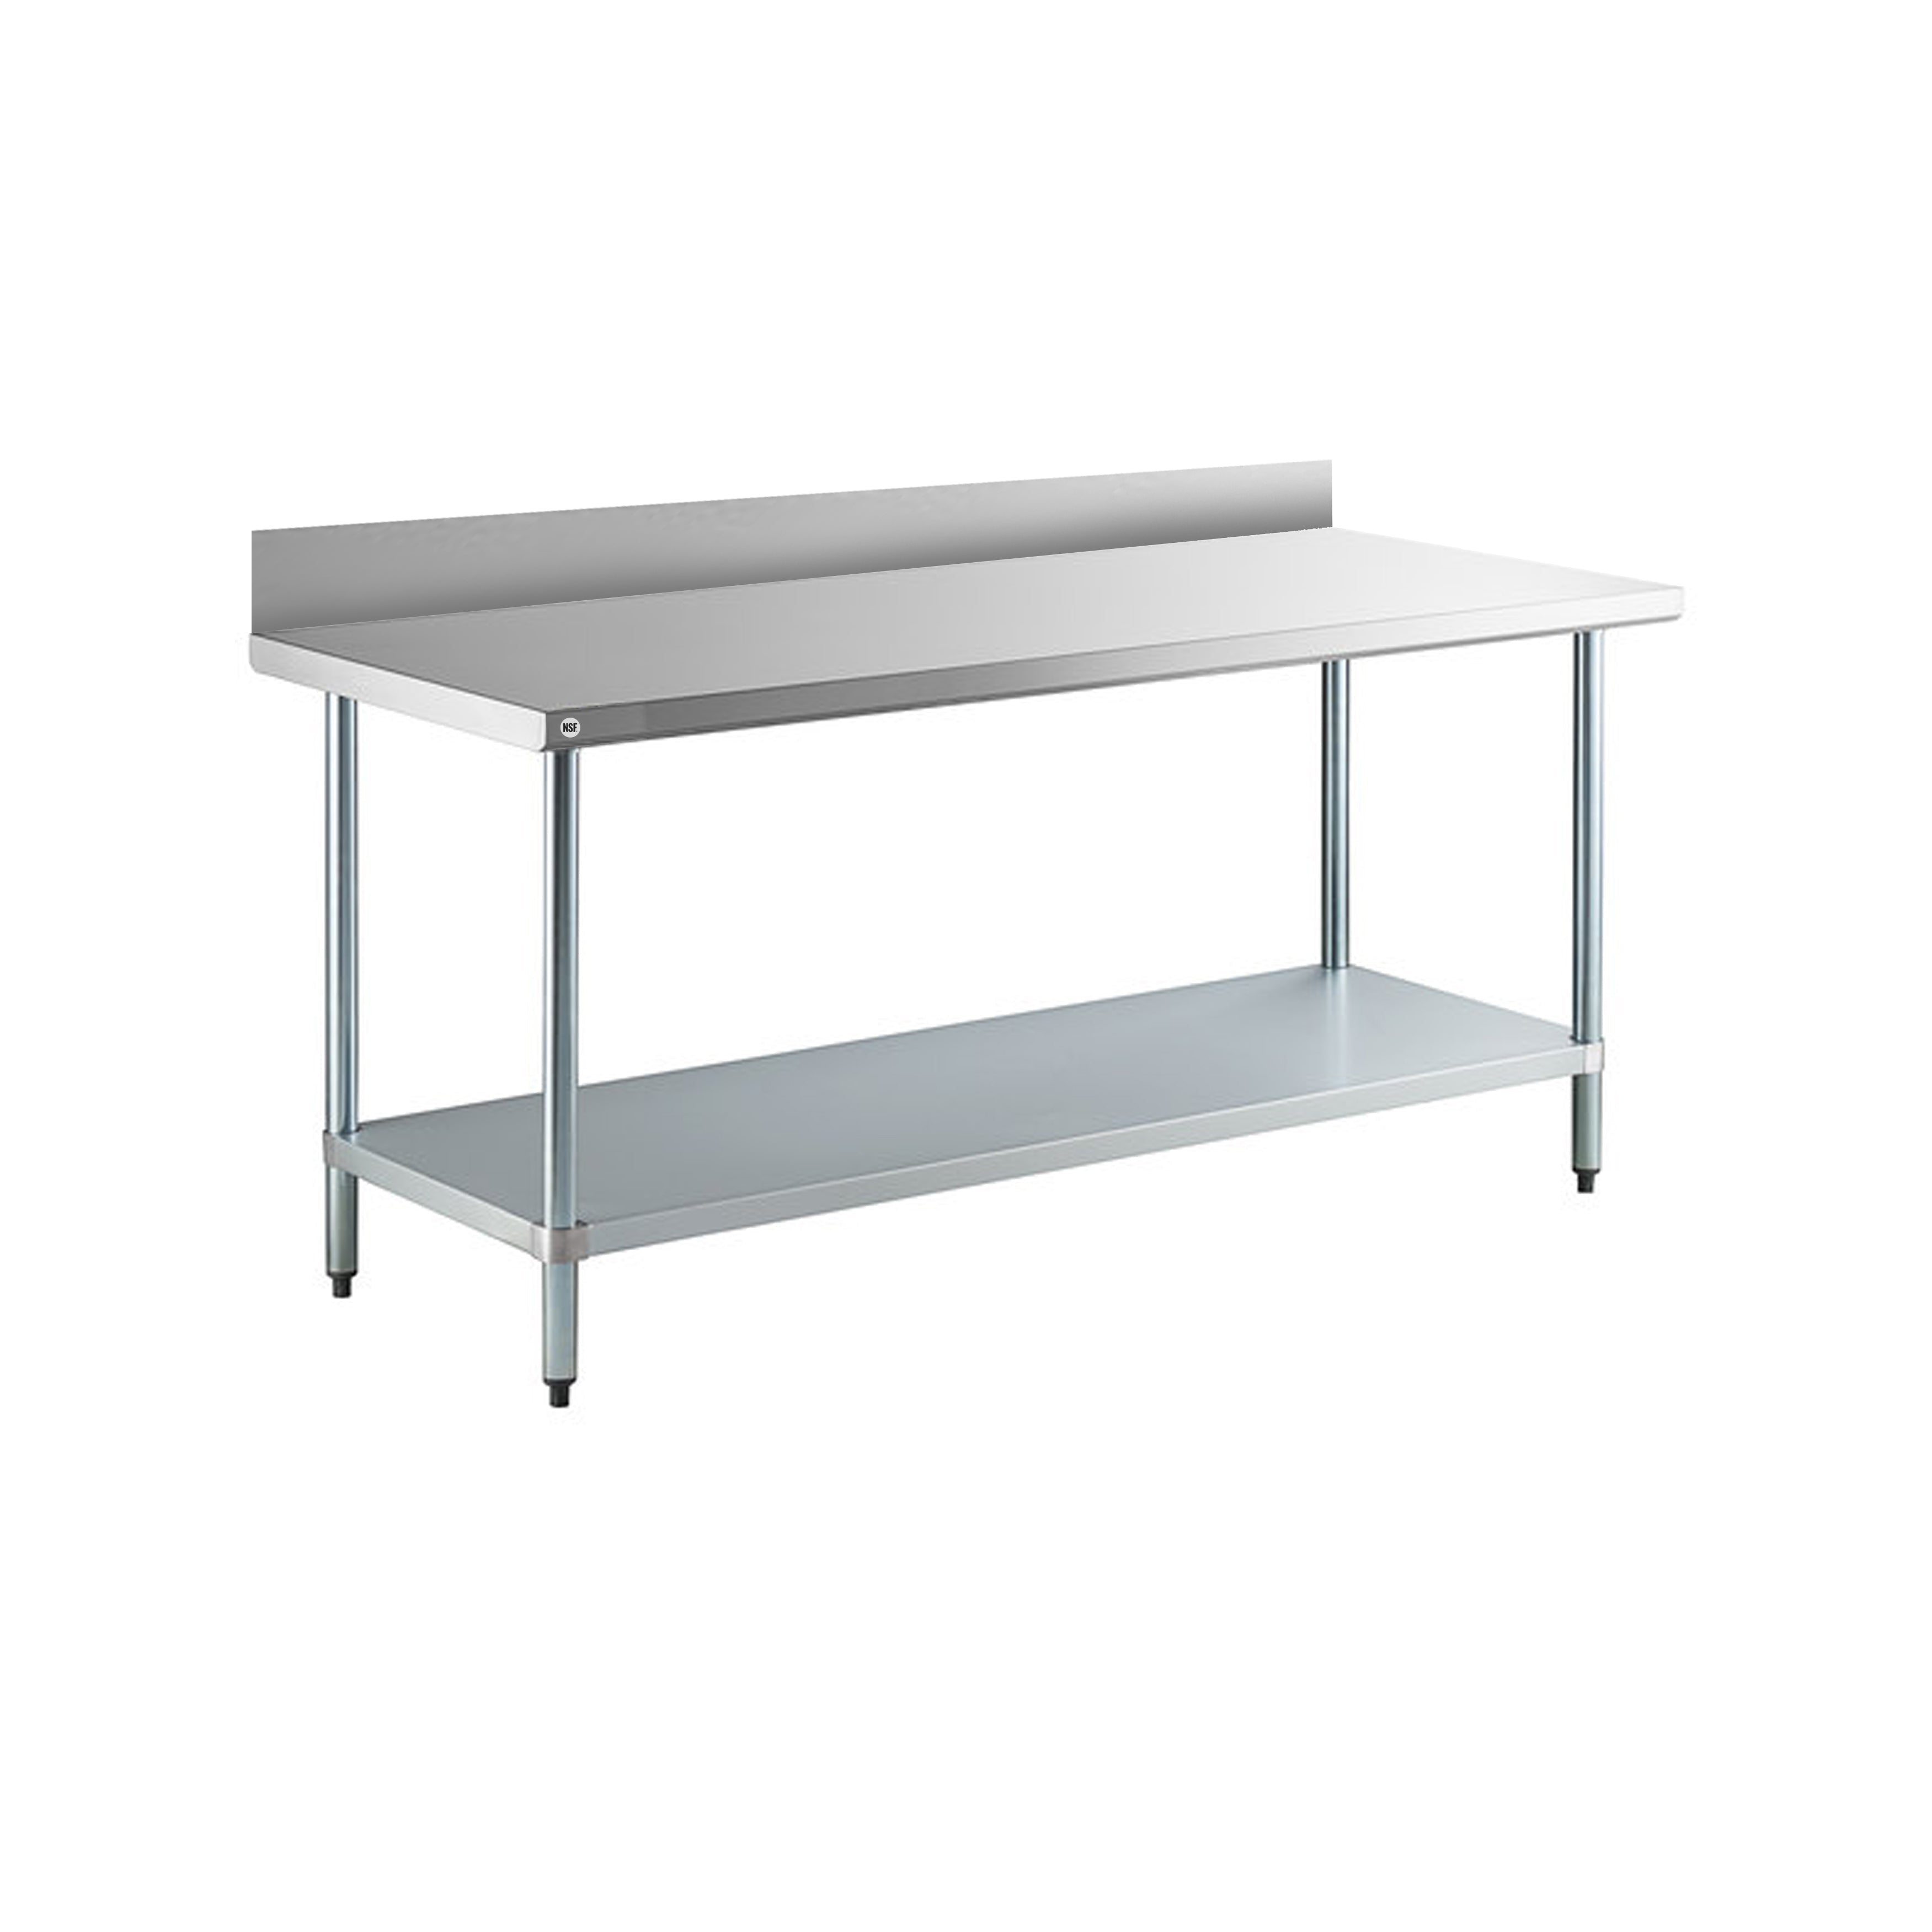 Omcan - 22085, Commercial 24" x 96" Stainless Steel Kitchen Work Table with 4" BackSplash 1600lbs Light Duty